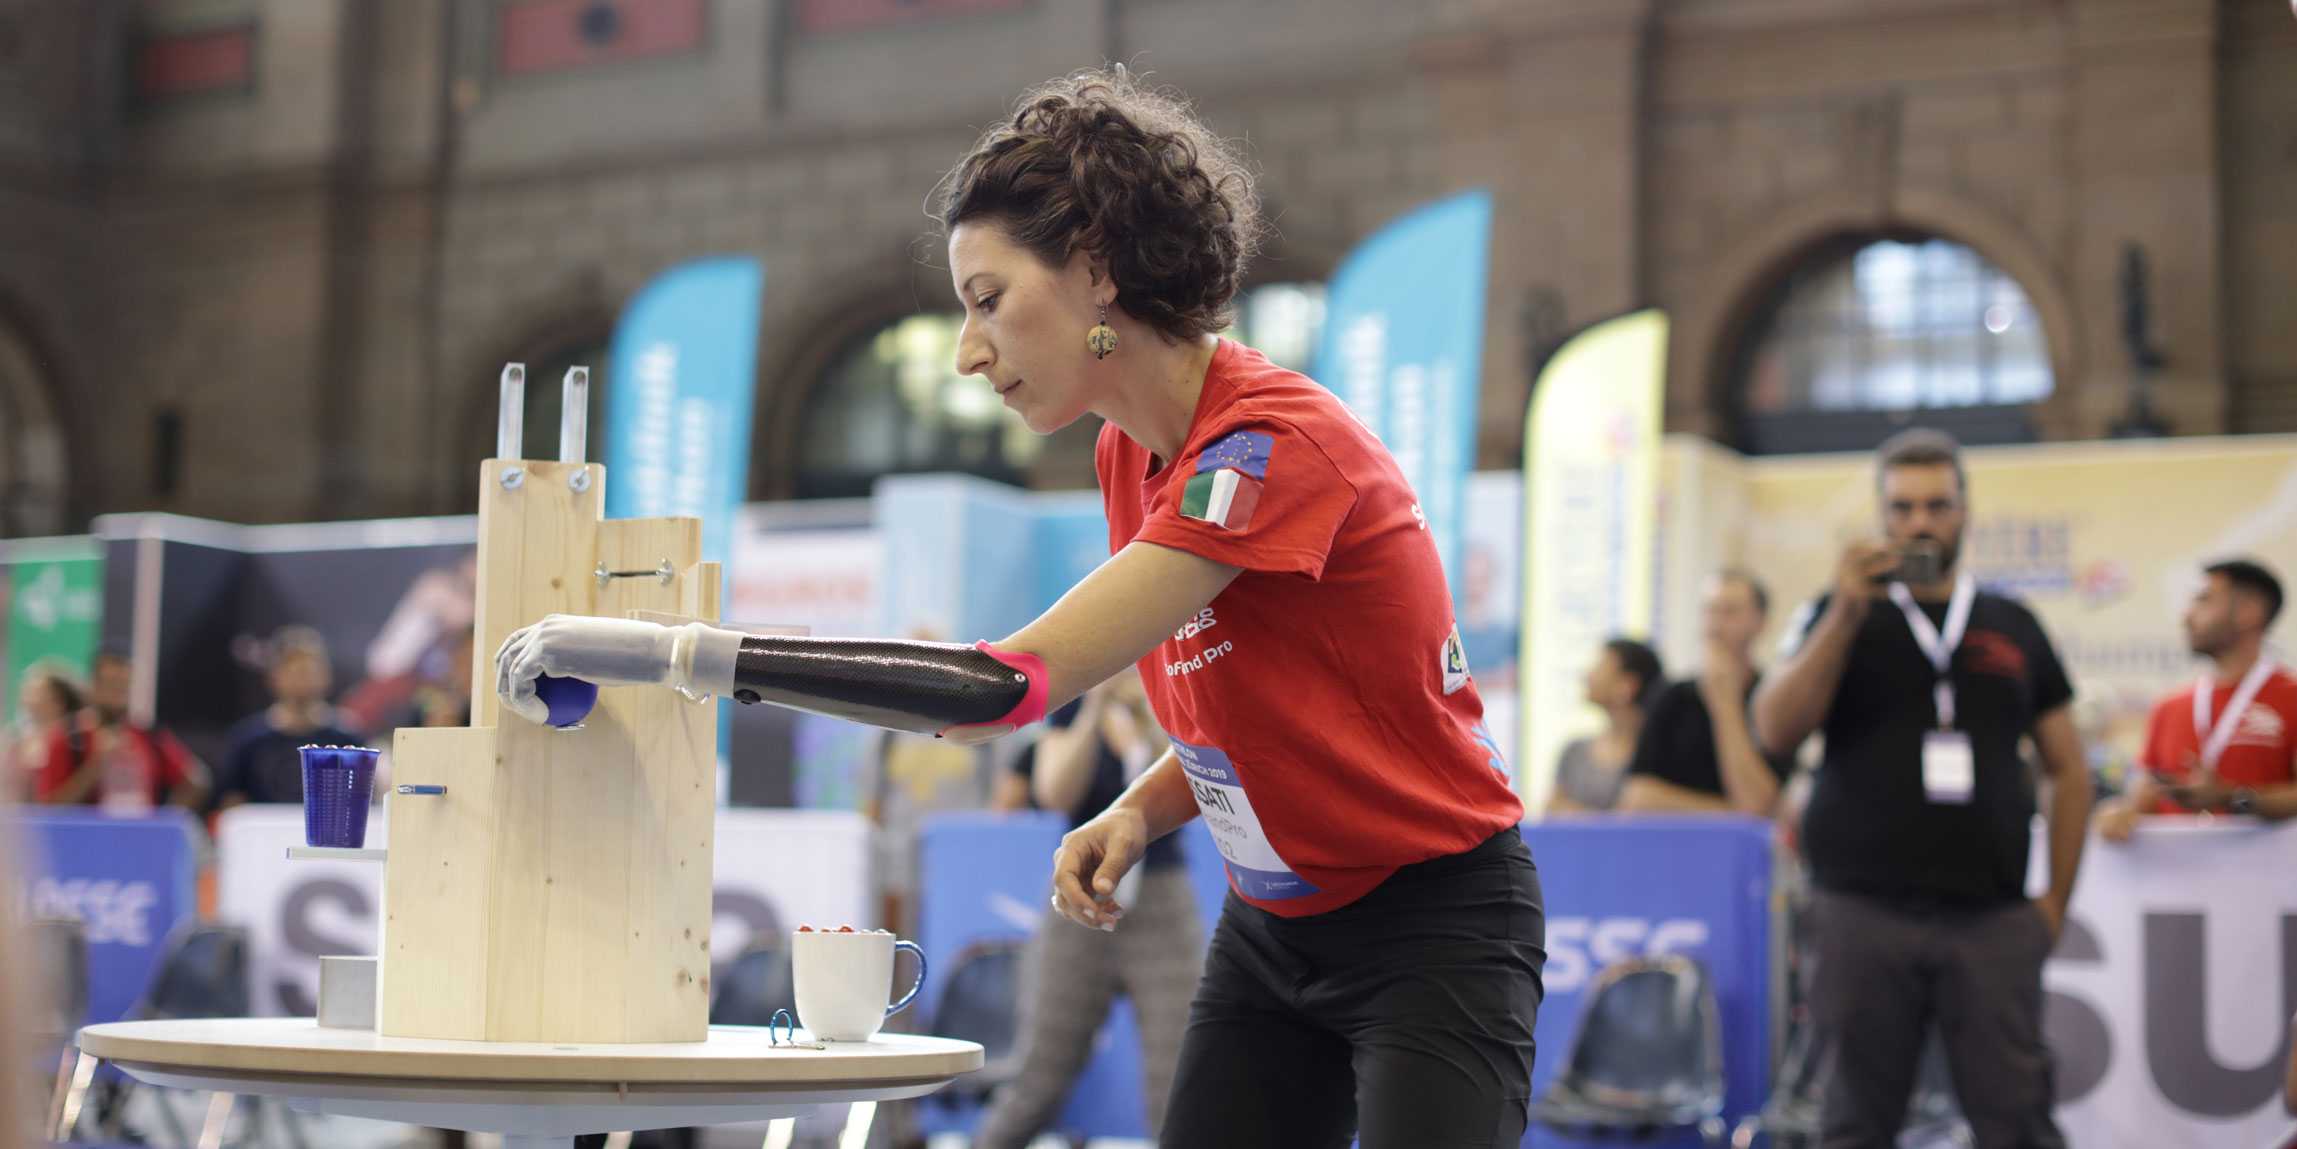 Woman with prosthetic arm grabs a blue ball